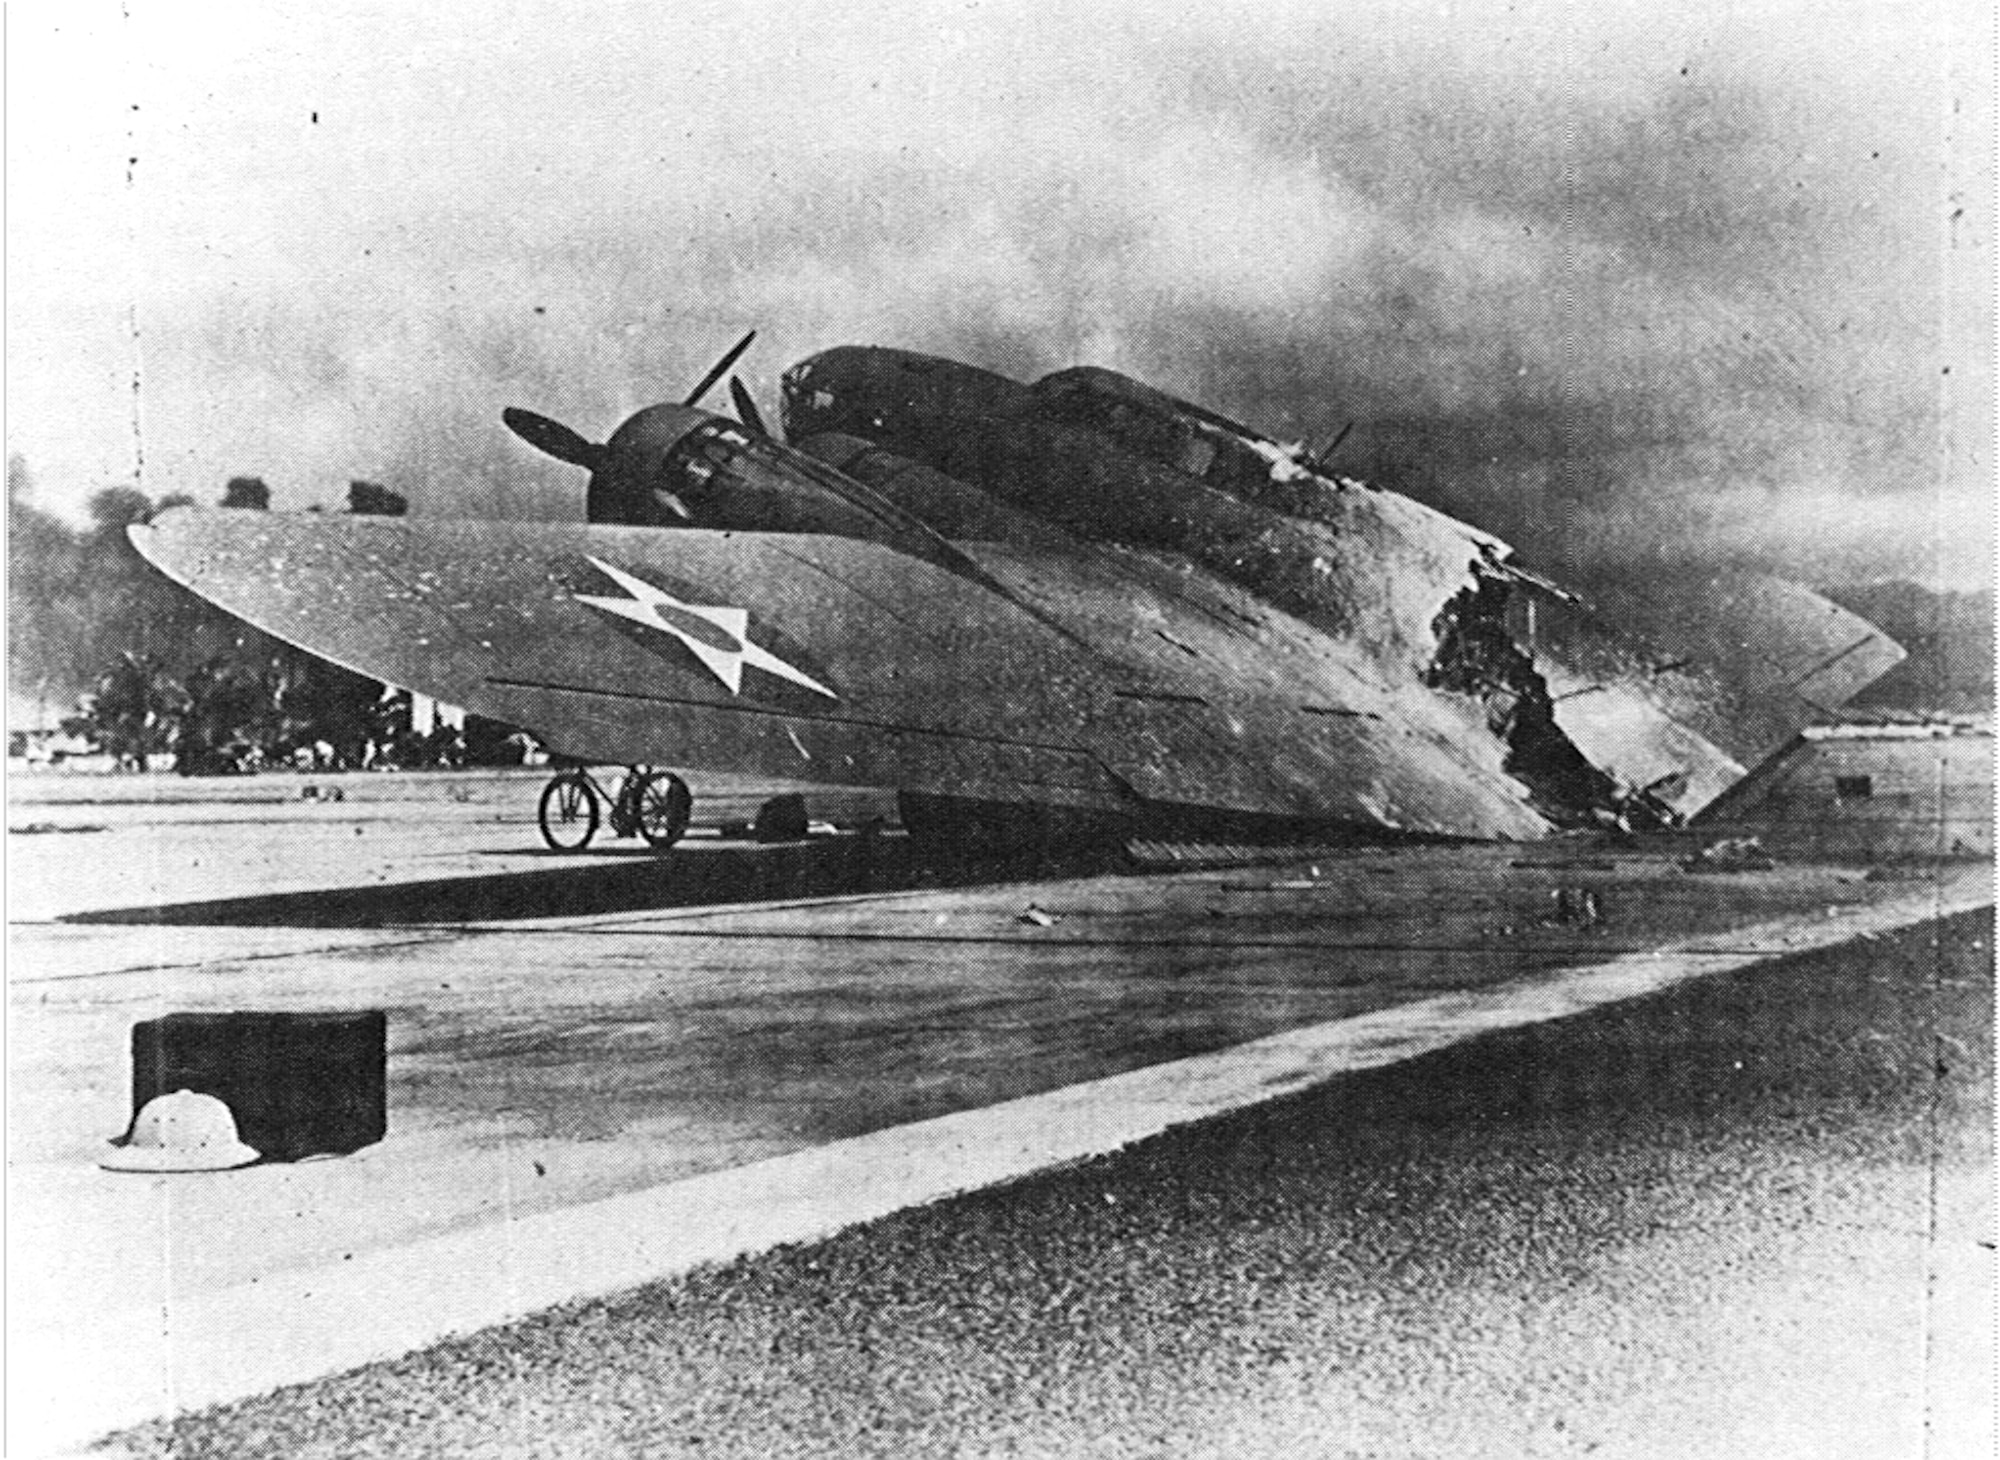 A burned U.S. B -17C after the Empire of Japan attacked Wheeler Air Field Dec. 7, 1941. The attack well known for crippling the U.S. Pacific Naval Fleet also left approximately 700 U.S Airmen killed or wounded and 66 percent of the Air Force strength in Hawaii decimated. The Japanese lost only 29 pilots from more than 350 planes launched from aircraft carriers north of Hawaii. (Courtesy Photo/Tai Sing Loo, Pearl Harbor's main cameraman 1918 to 1948)